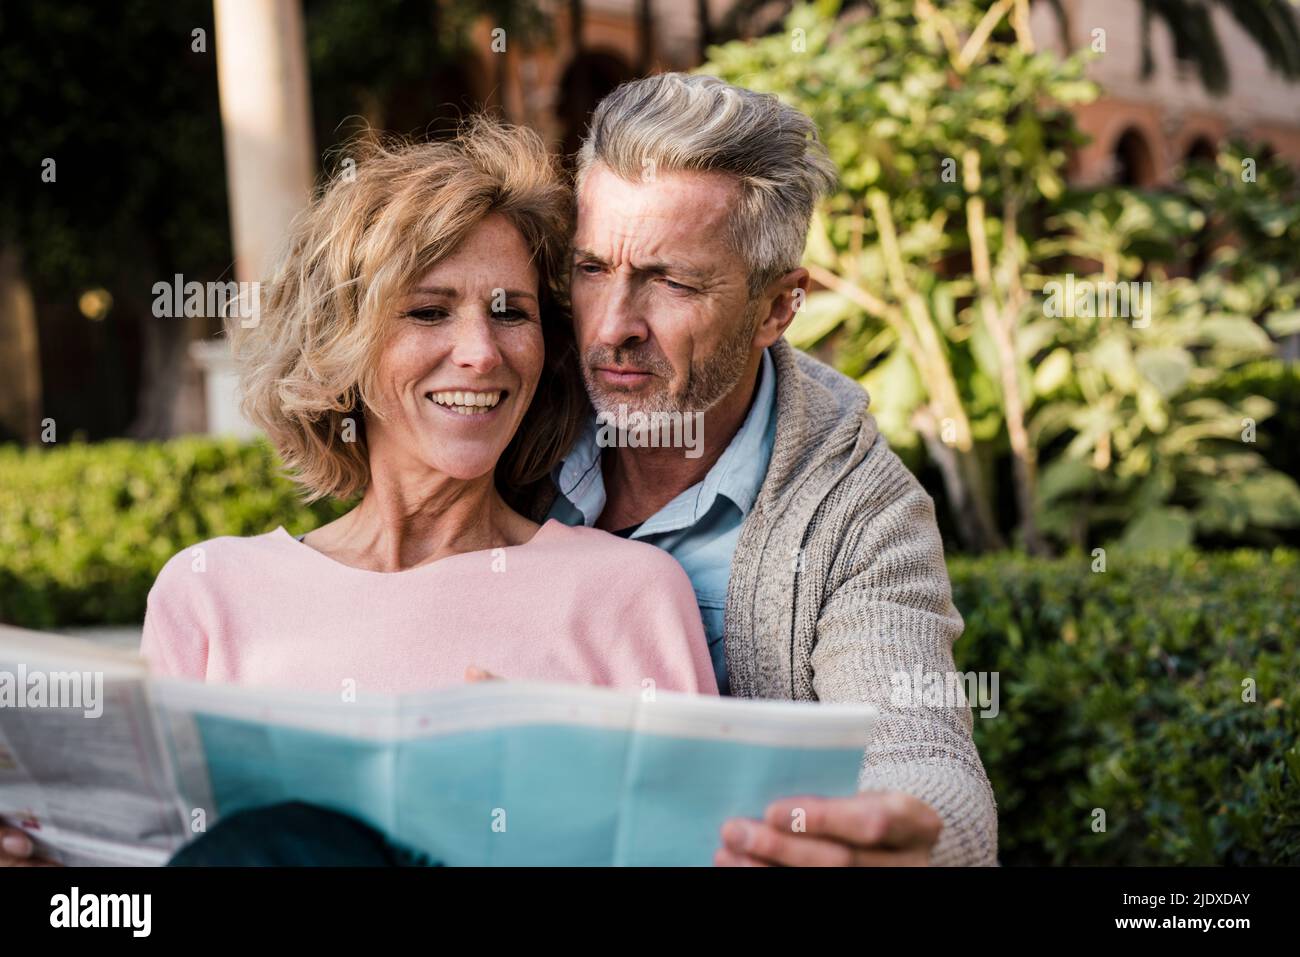 Smiling woman reading newspaper with man in park Stock Photo